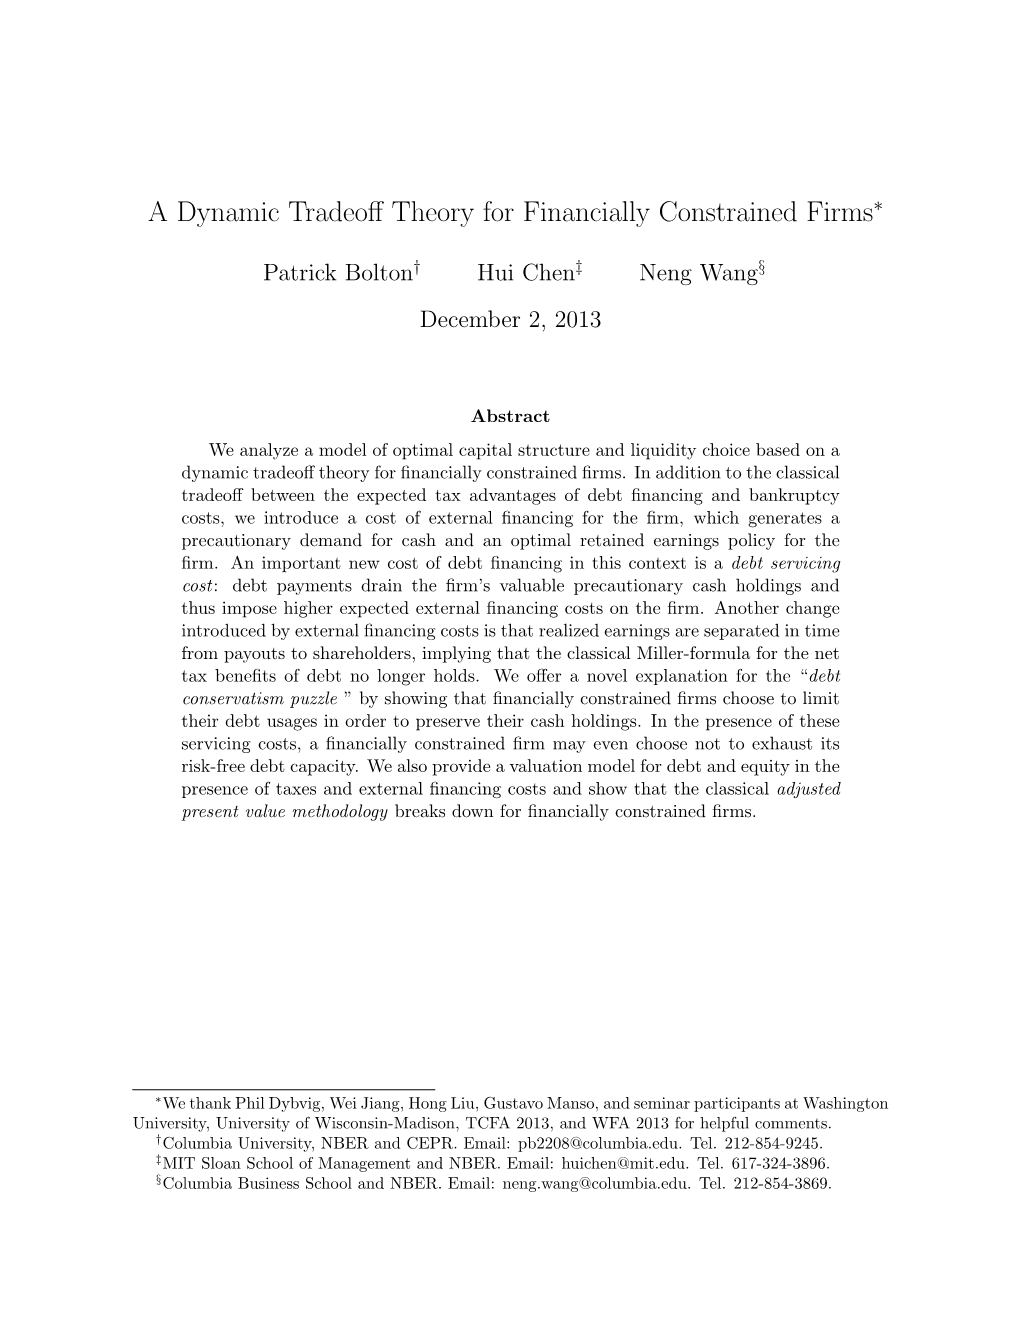 A Dynamic Tradeoff Theory for Financially Constrained Firms